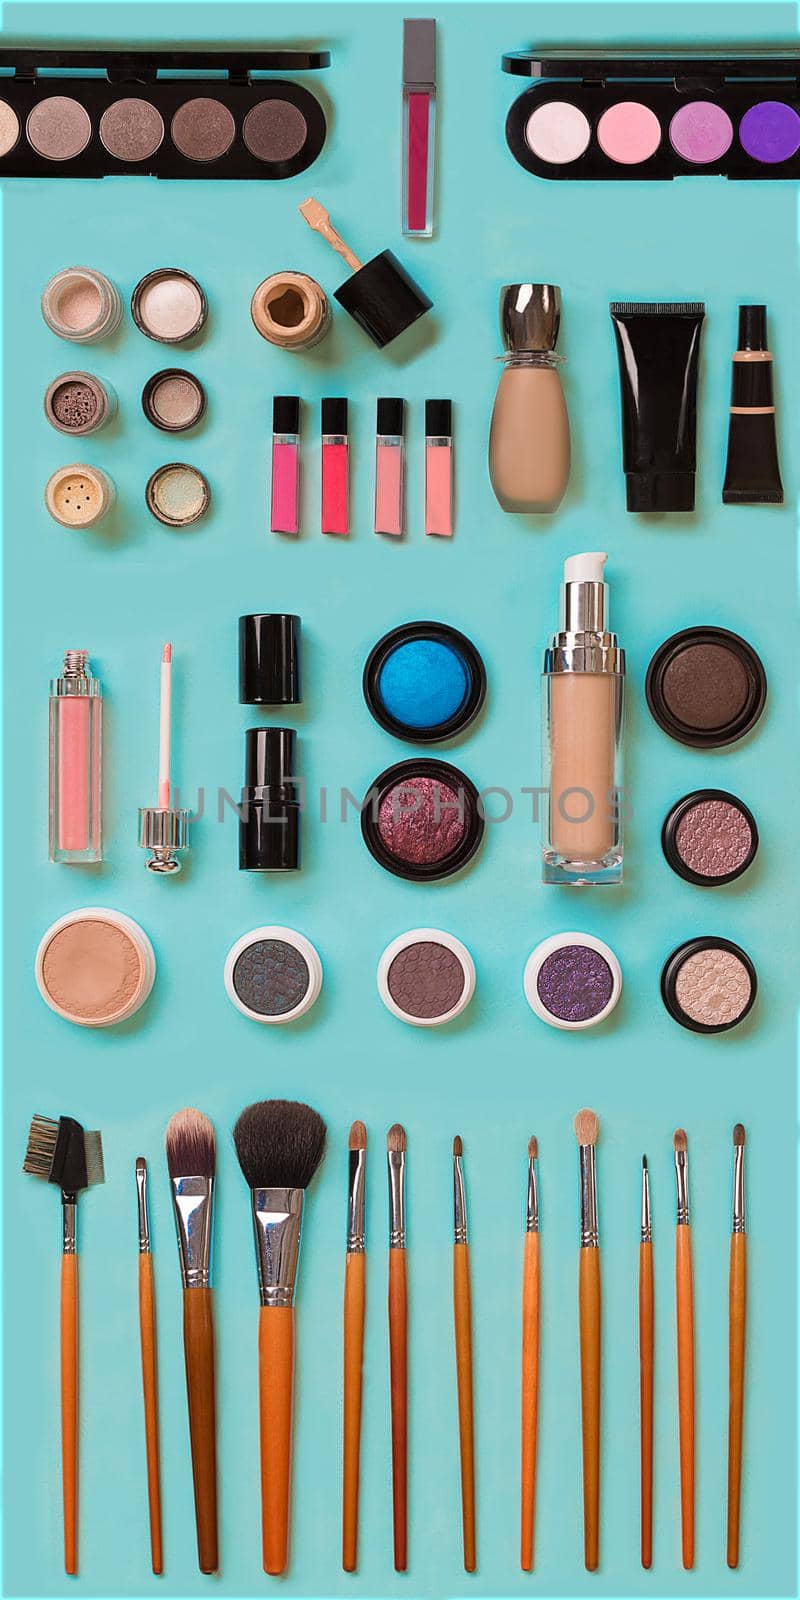 cosmetics for facial makeup: brushes, powder, lipstick, eye shadow, trimmer and other accessories on blue background top view. by nazarovsergey